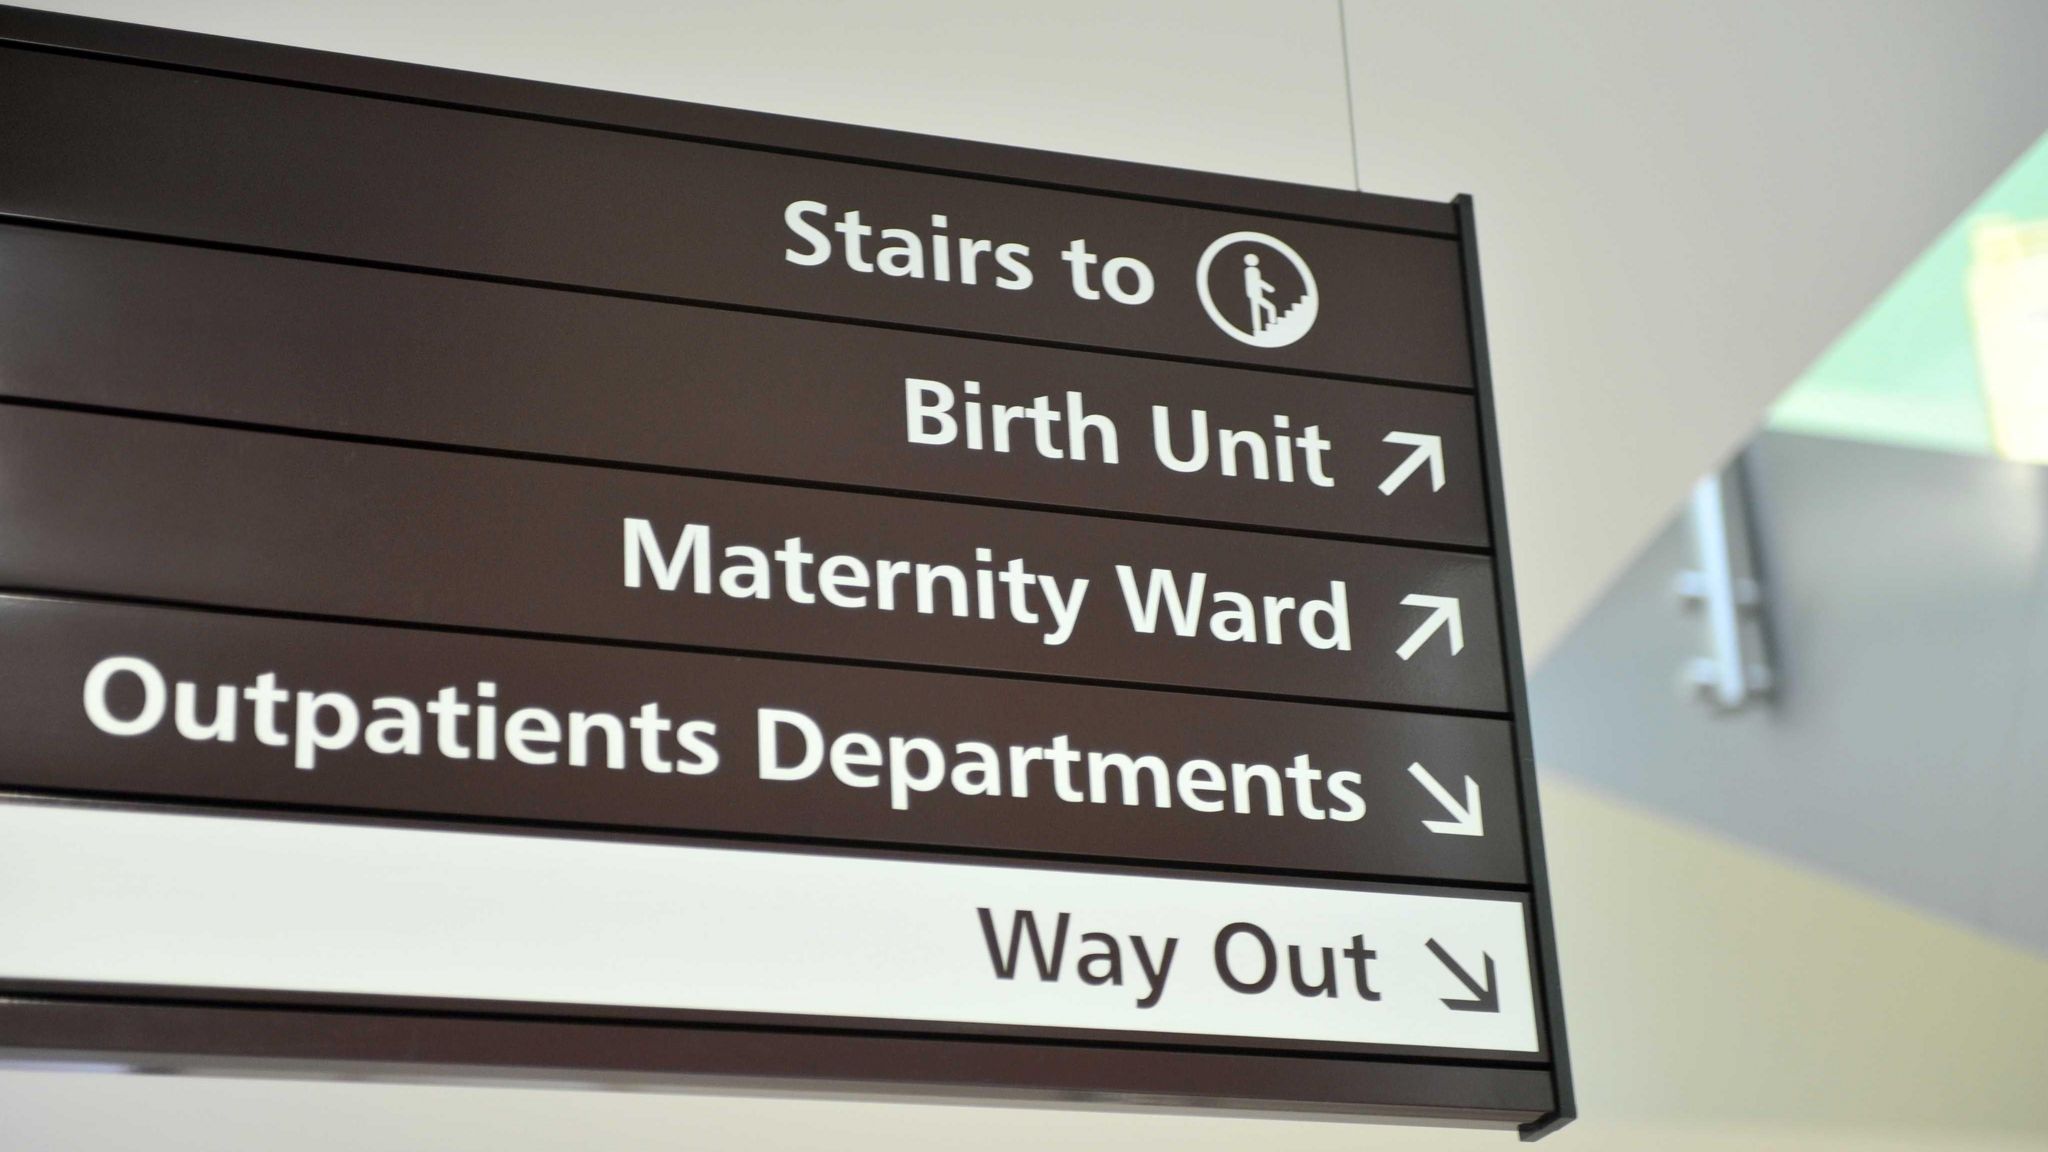 A sign for the Birth Unit, Maternity Ward and Outpatients Department at the Women's Centre at the Royal Gloucestershire Hospital